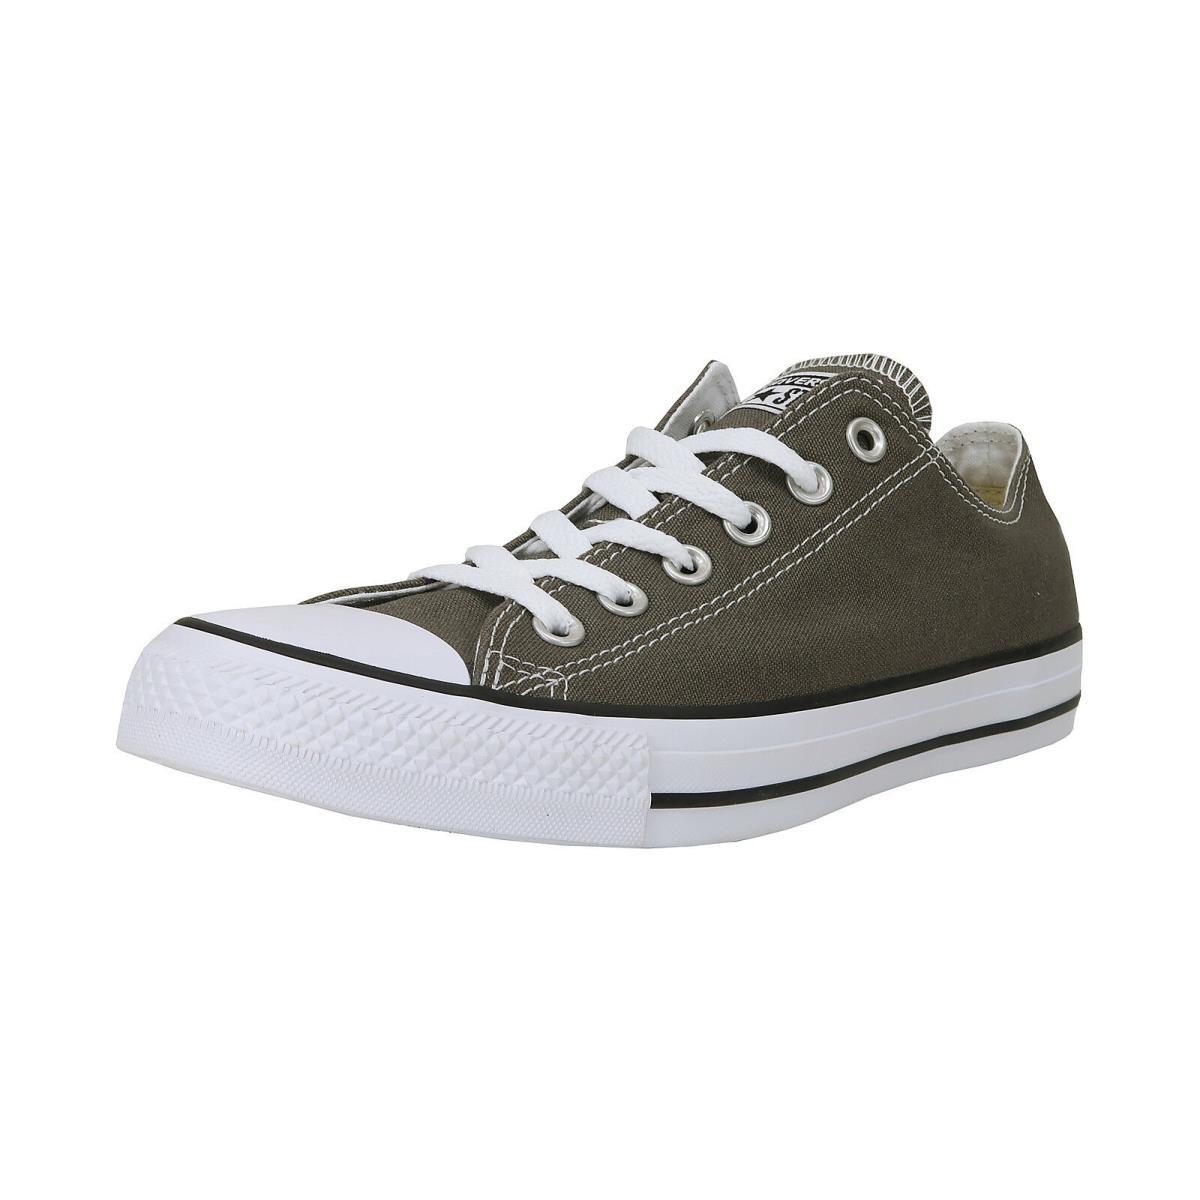 Converse shoes  - Gray , Charcoal Gray Manufacturer 4